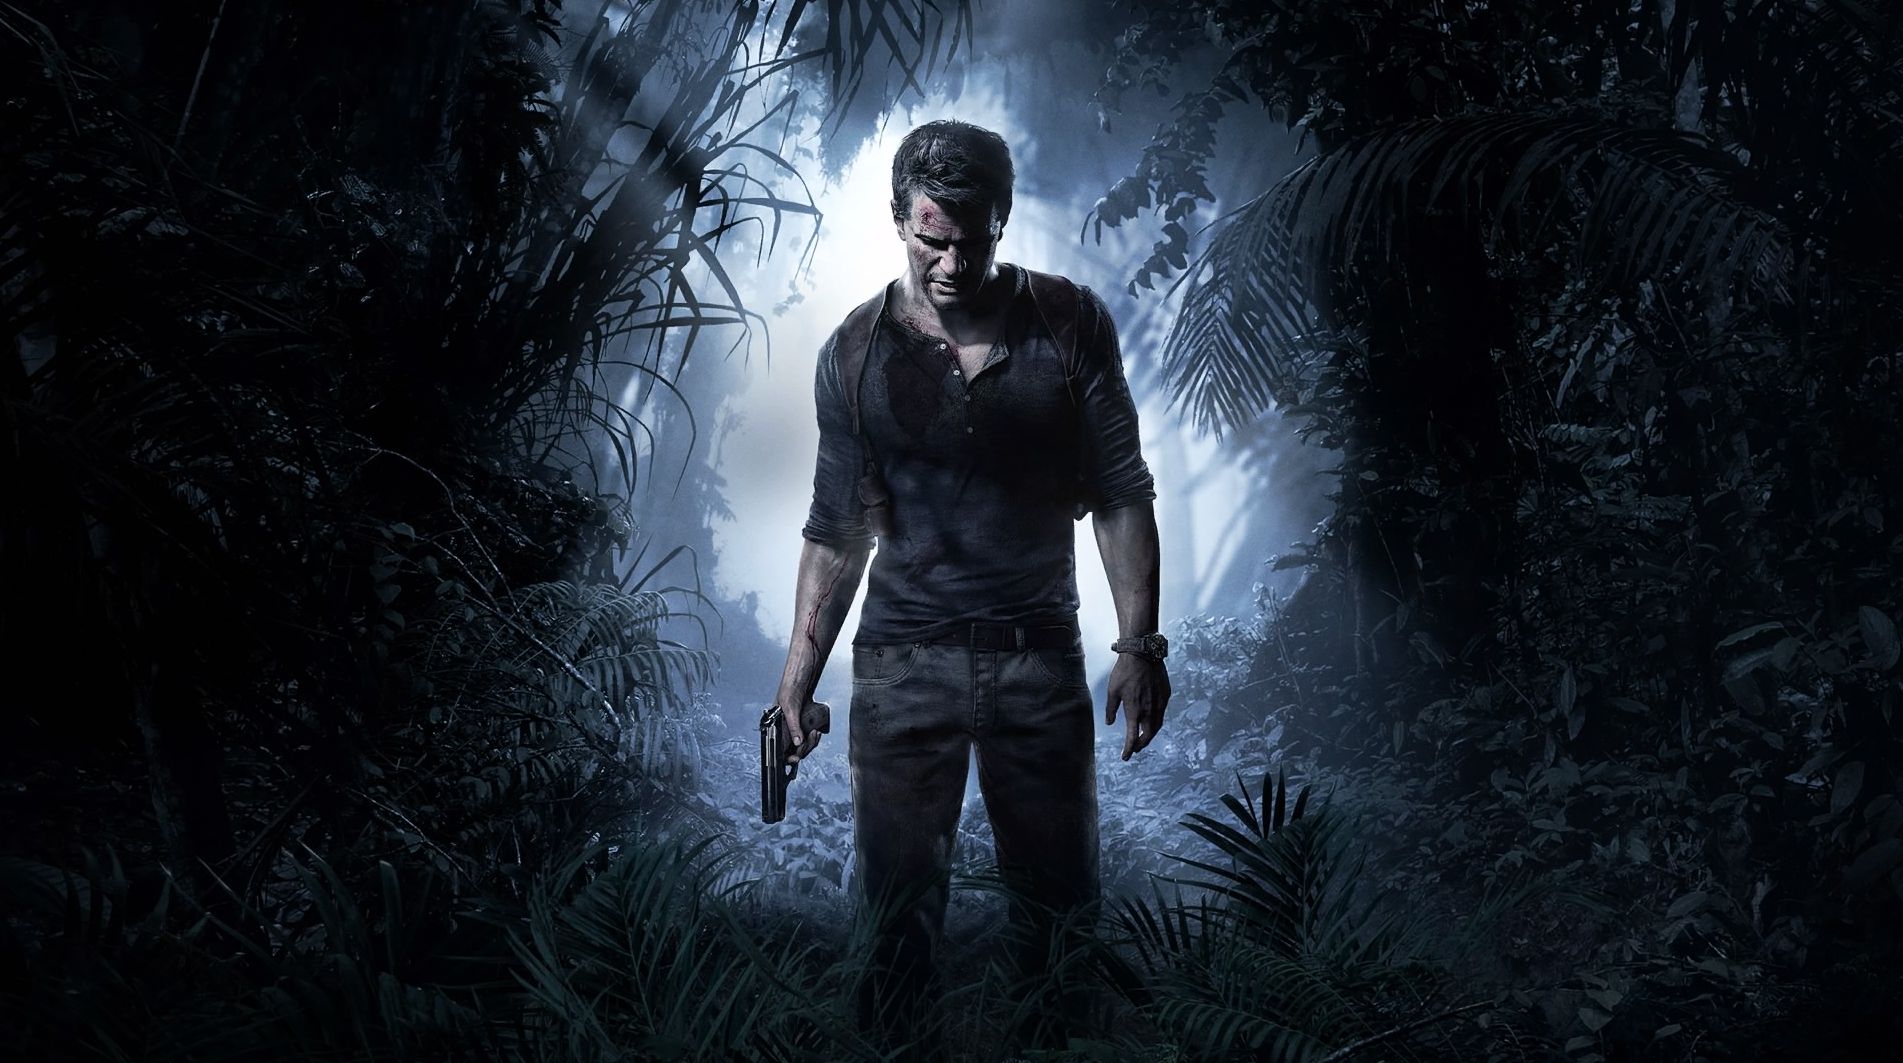 Uncharted 4: A Thief's End key art